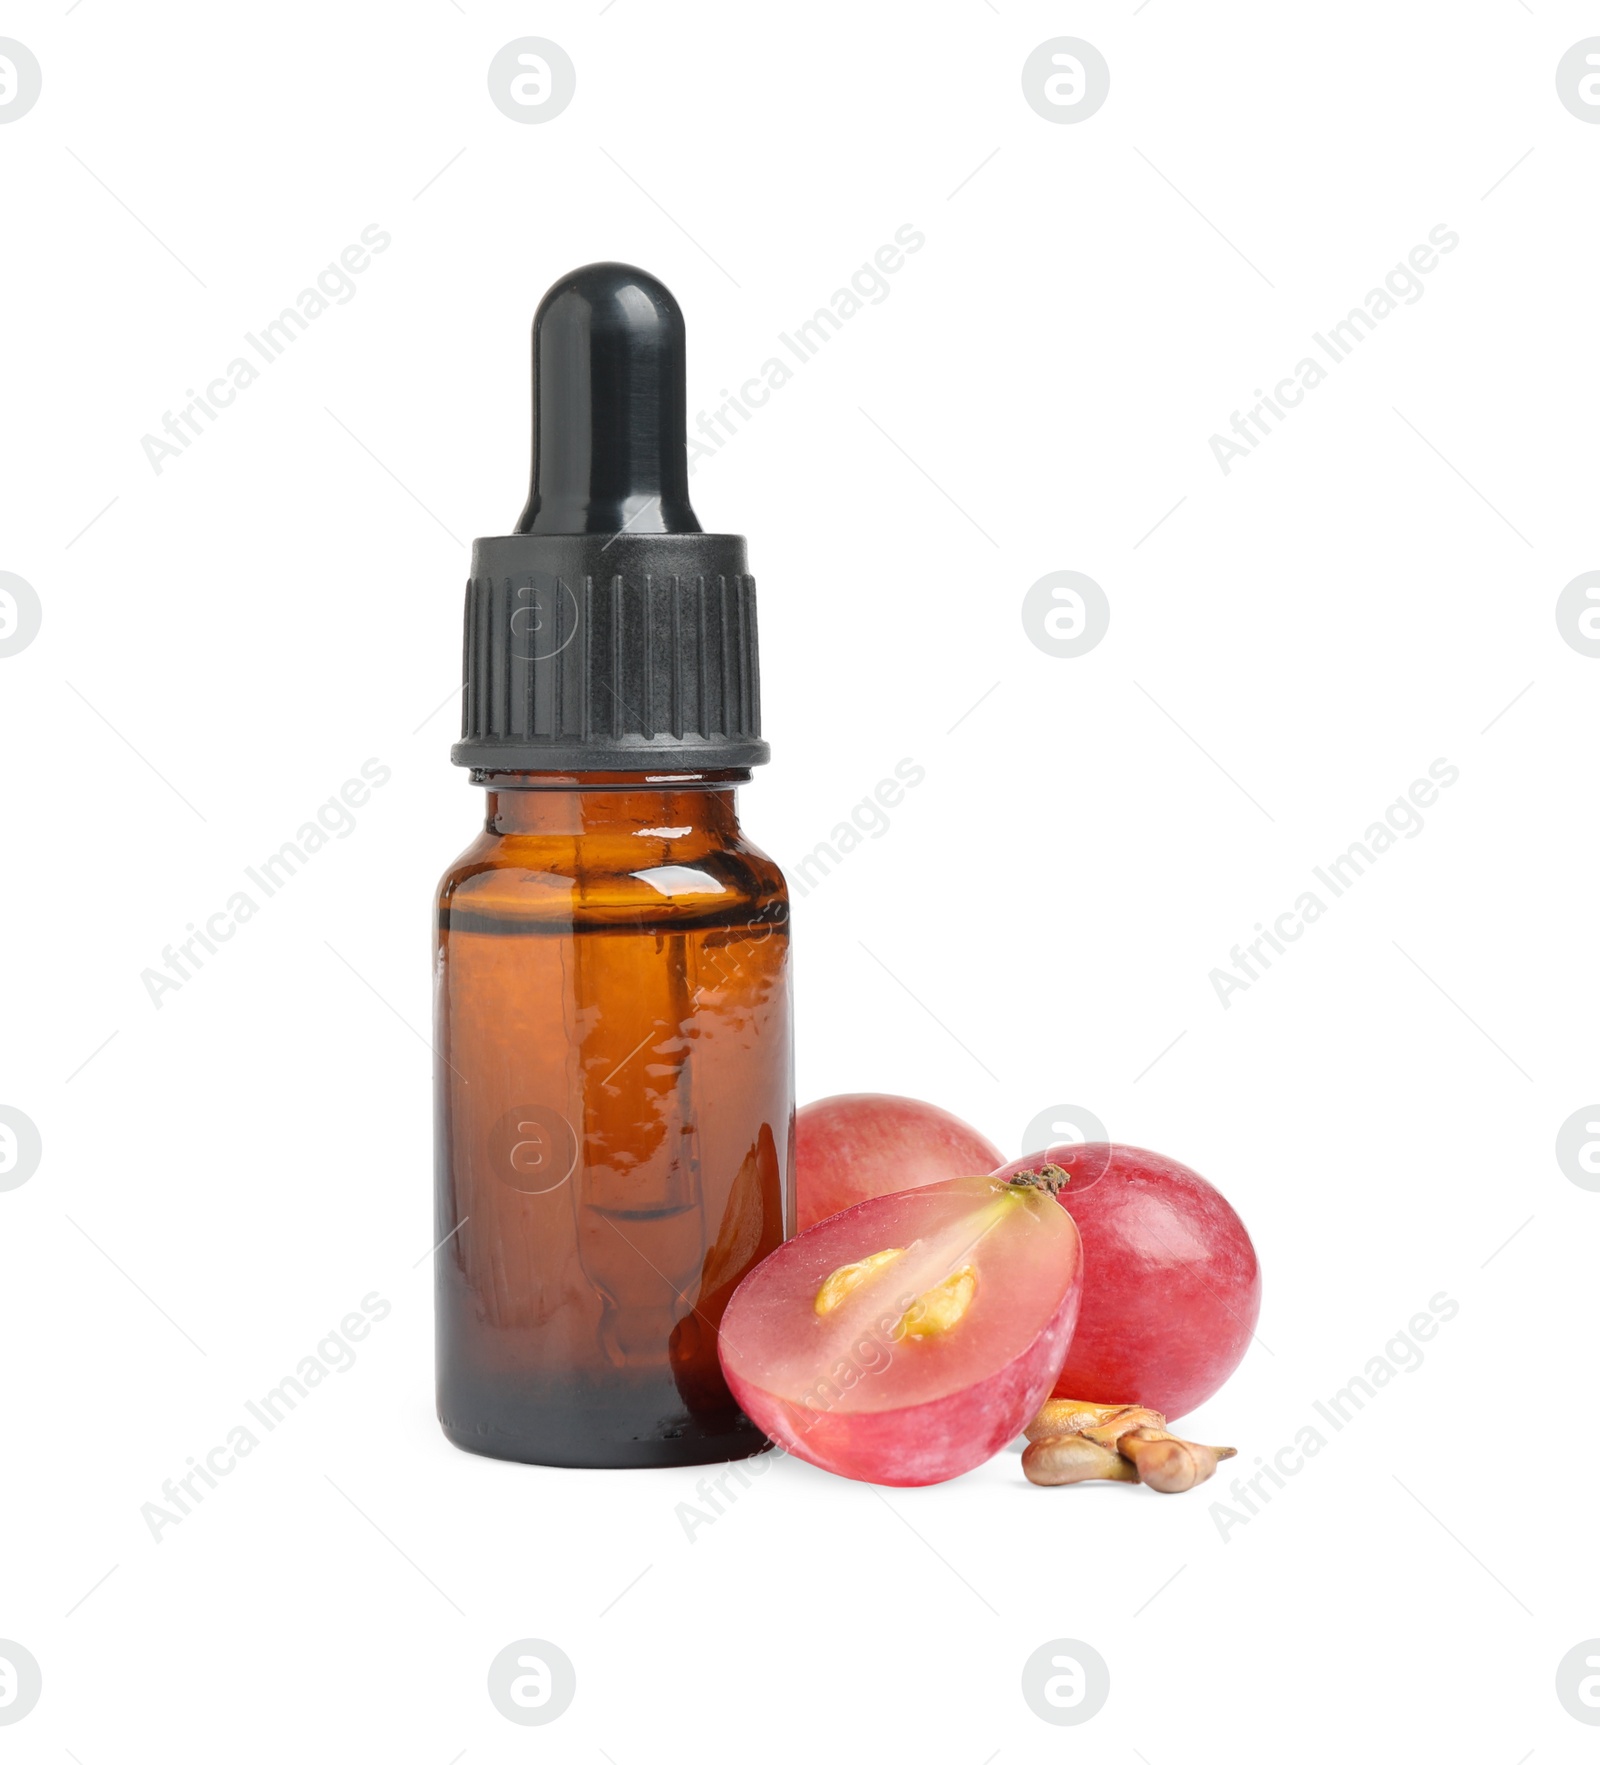 Photo of Organic red grapes, seeds and bottle of natural essential oil on white background